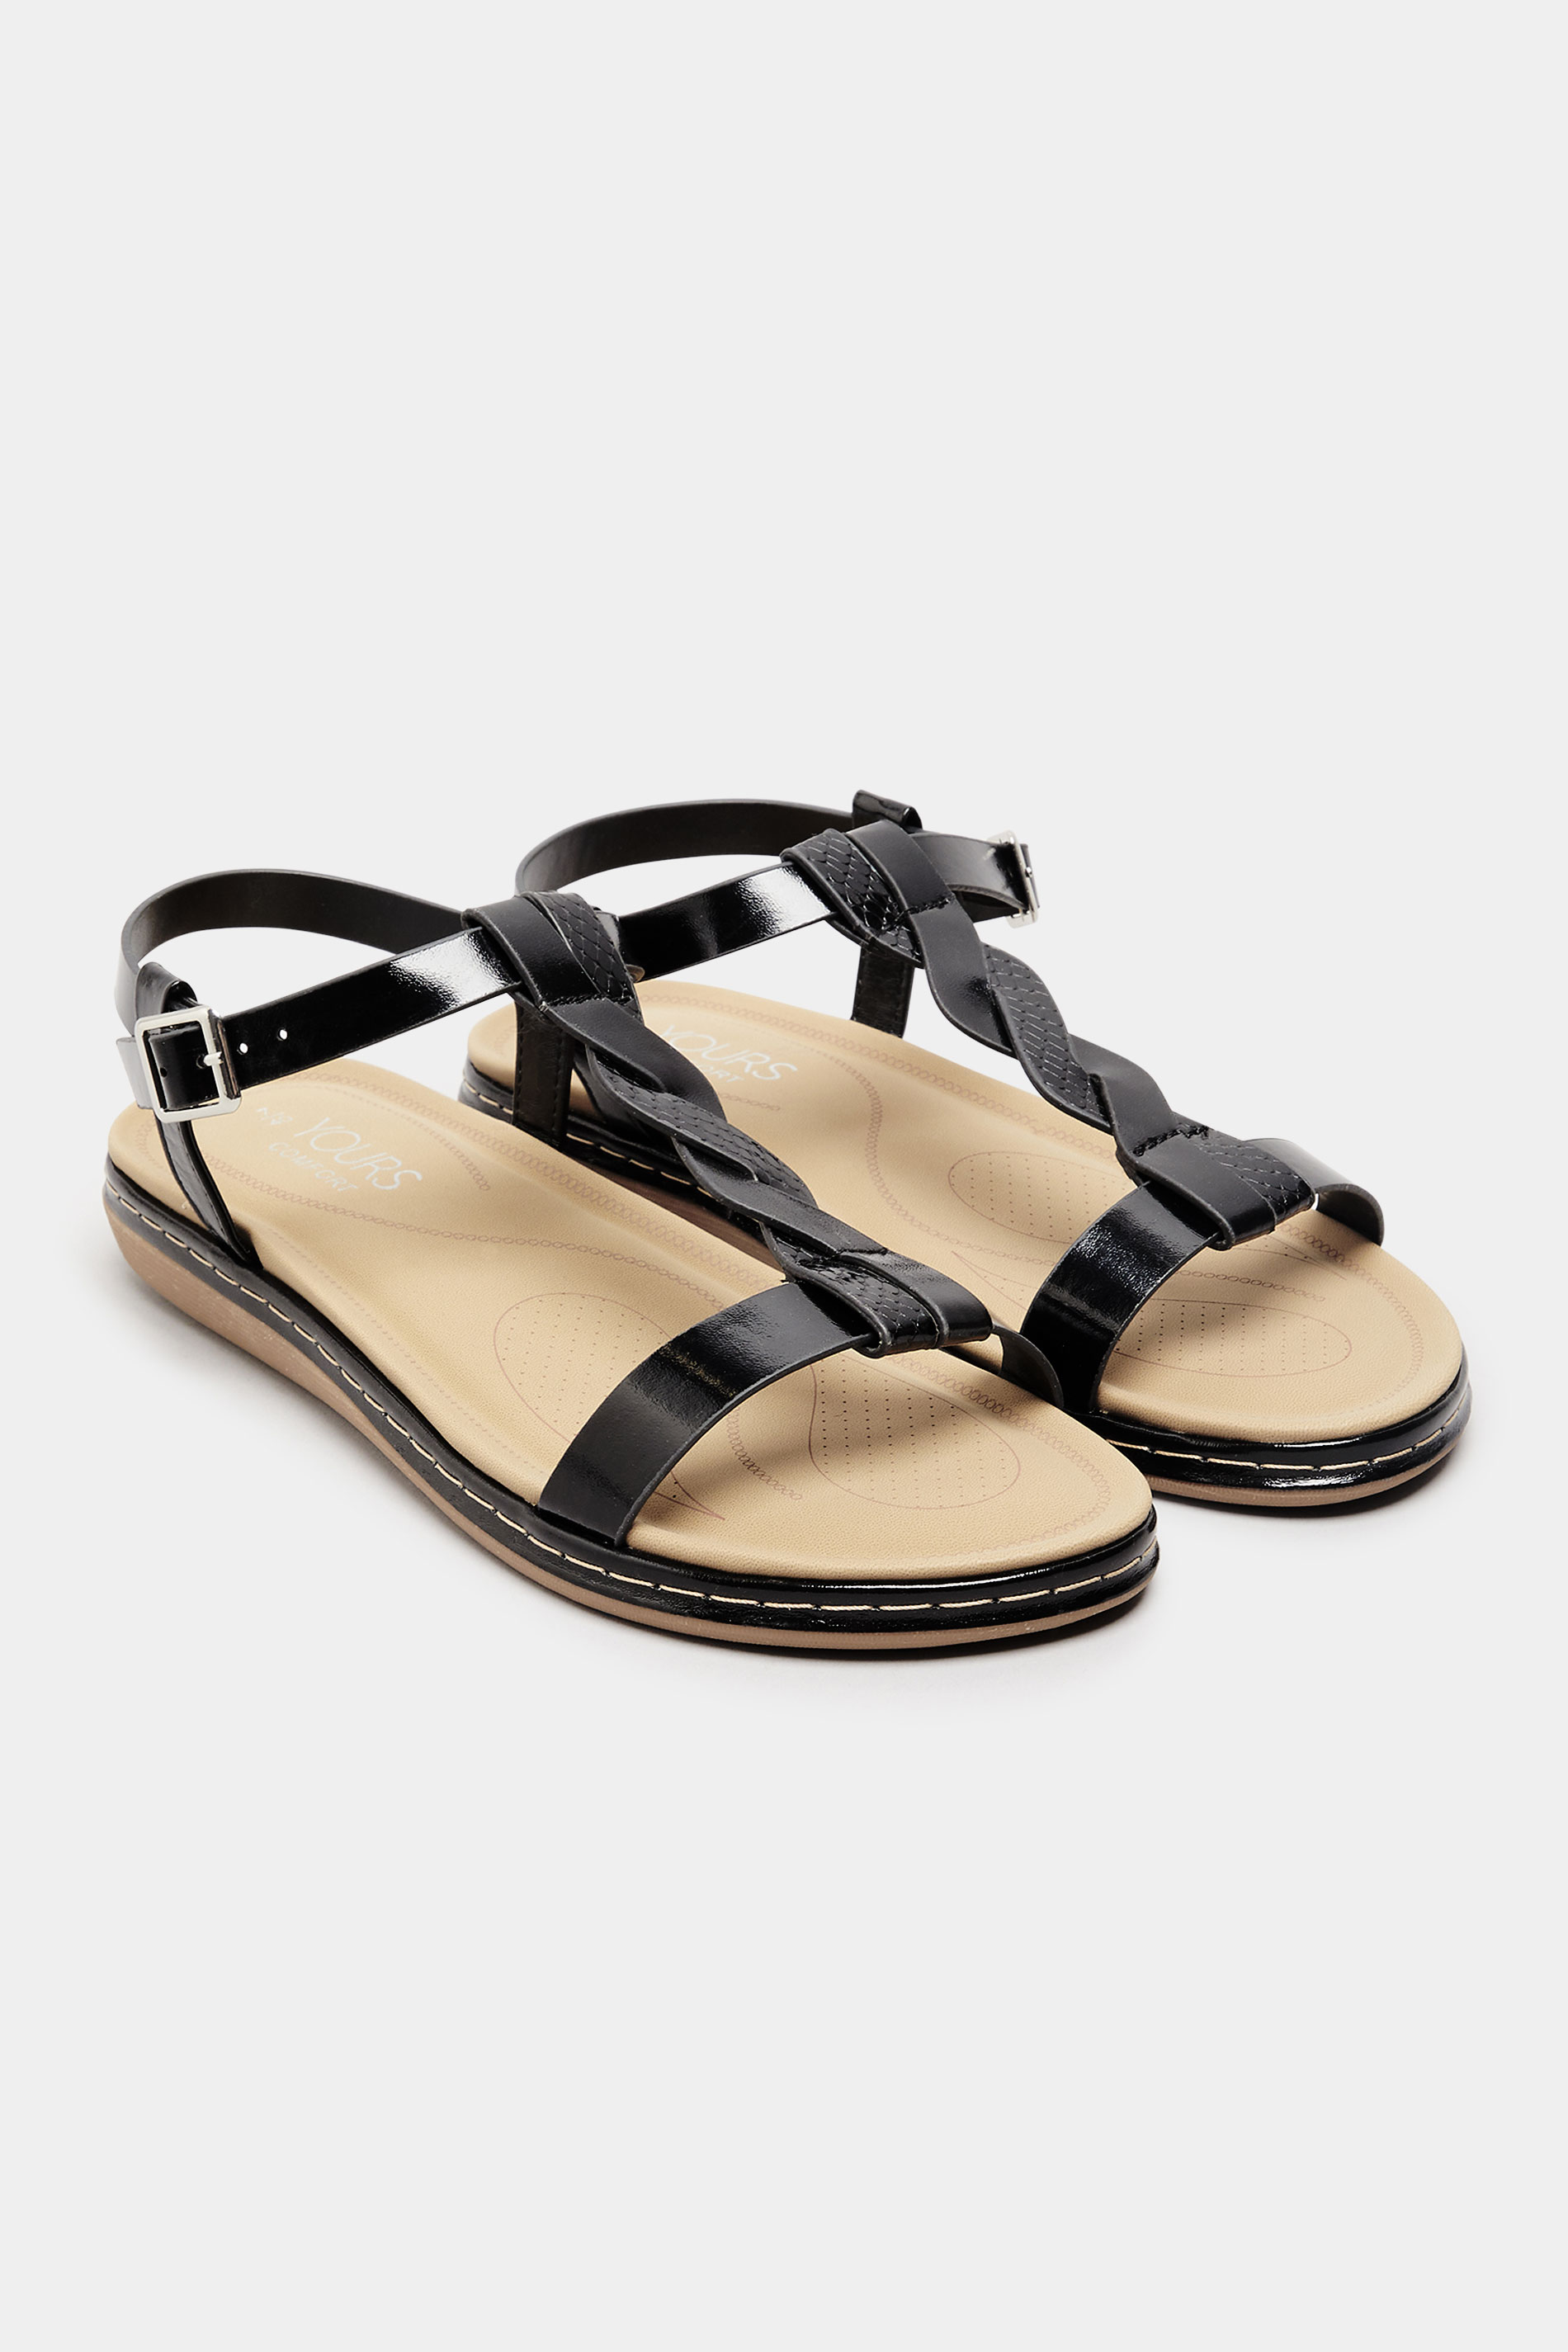 Chaussures Pieds Larges Sandales Pieds Larges | Sandales Noires Tressées Pieds Extra Larges EEE - LT73834